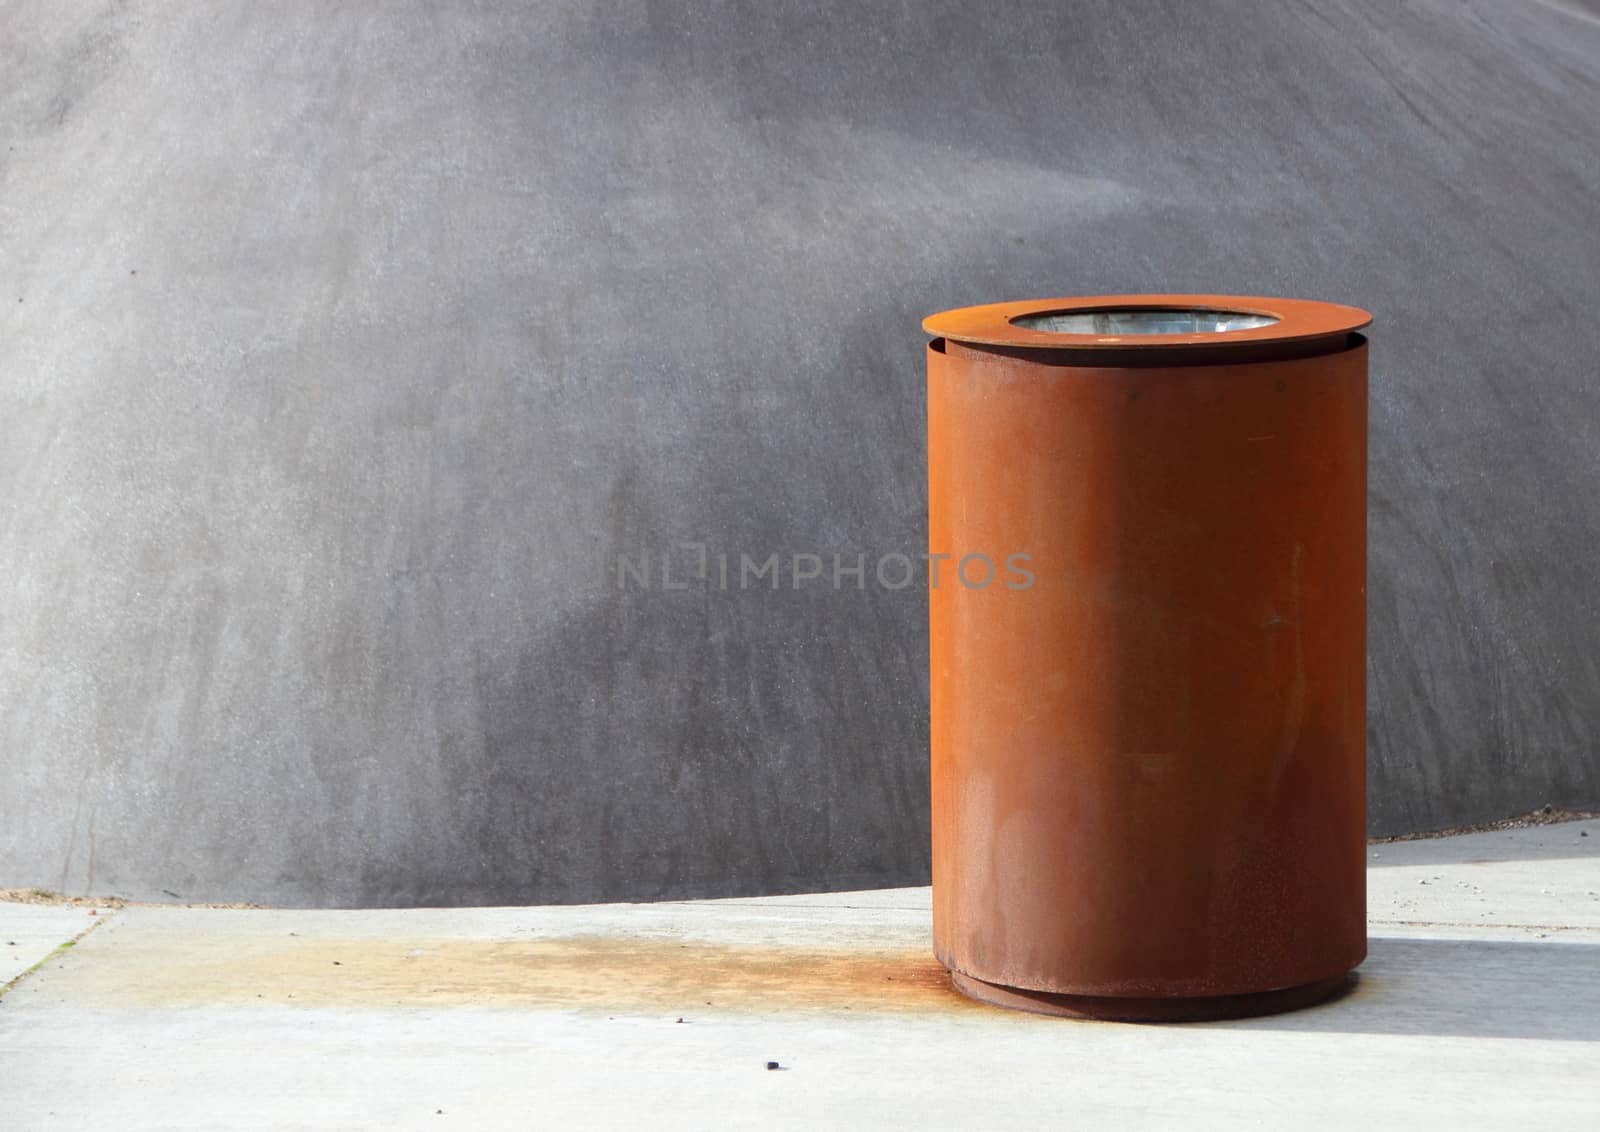 Garbage Can of Rusty Iron on Concrete Surface by HoleInTheBox